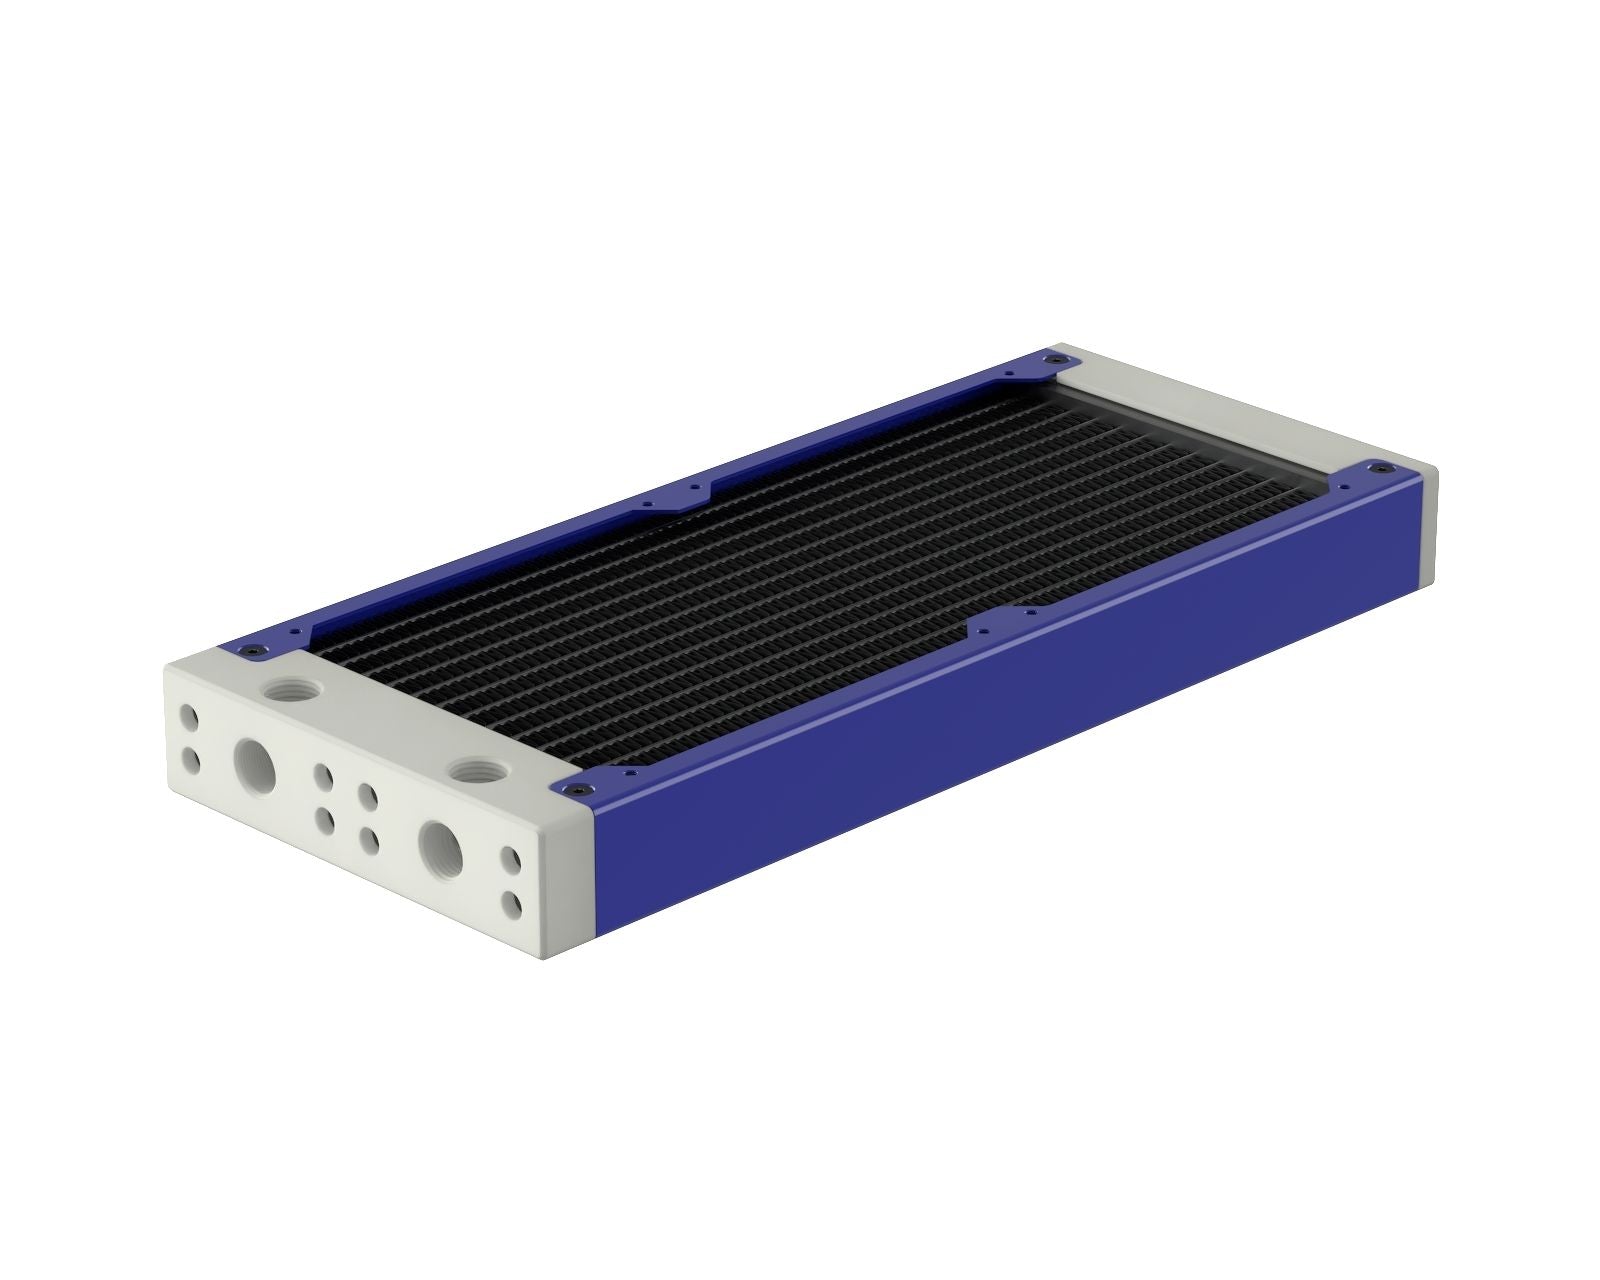 PrimoChill 240SL (30mm) EXIMO Modular Radiator, White POM, 2x120mm, Dual Fan (R-SL-W24) Available in 20+ Colors, Assembled in USA and Custom Watercooling Loop Ready - True Blue